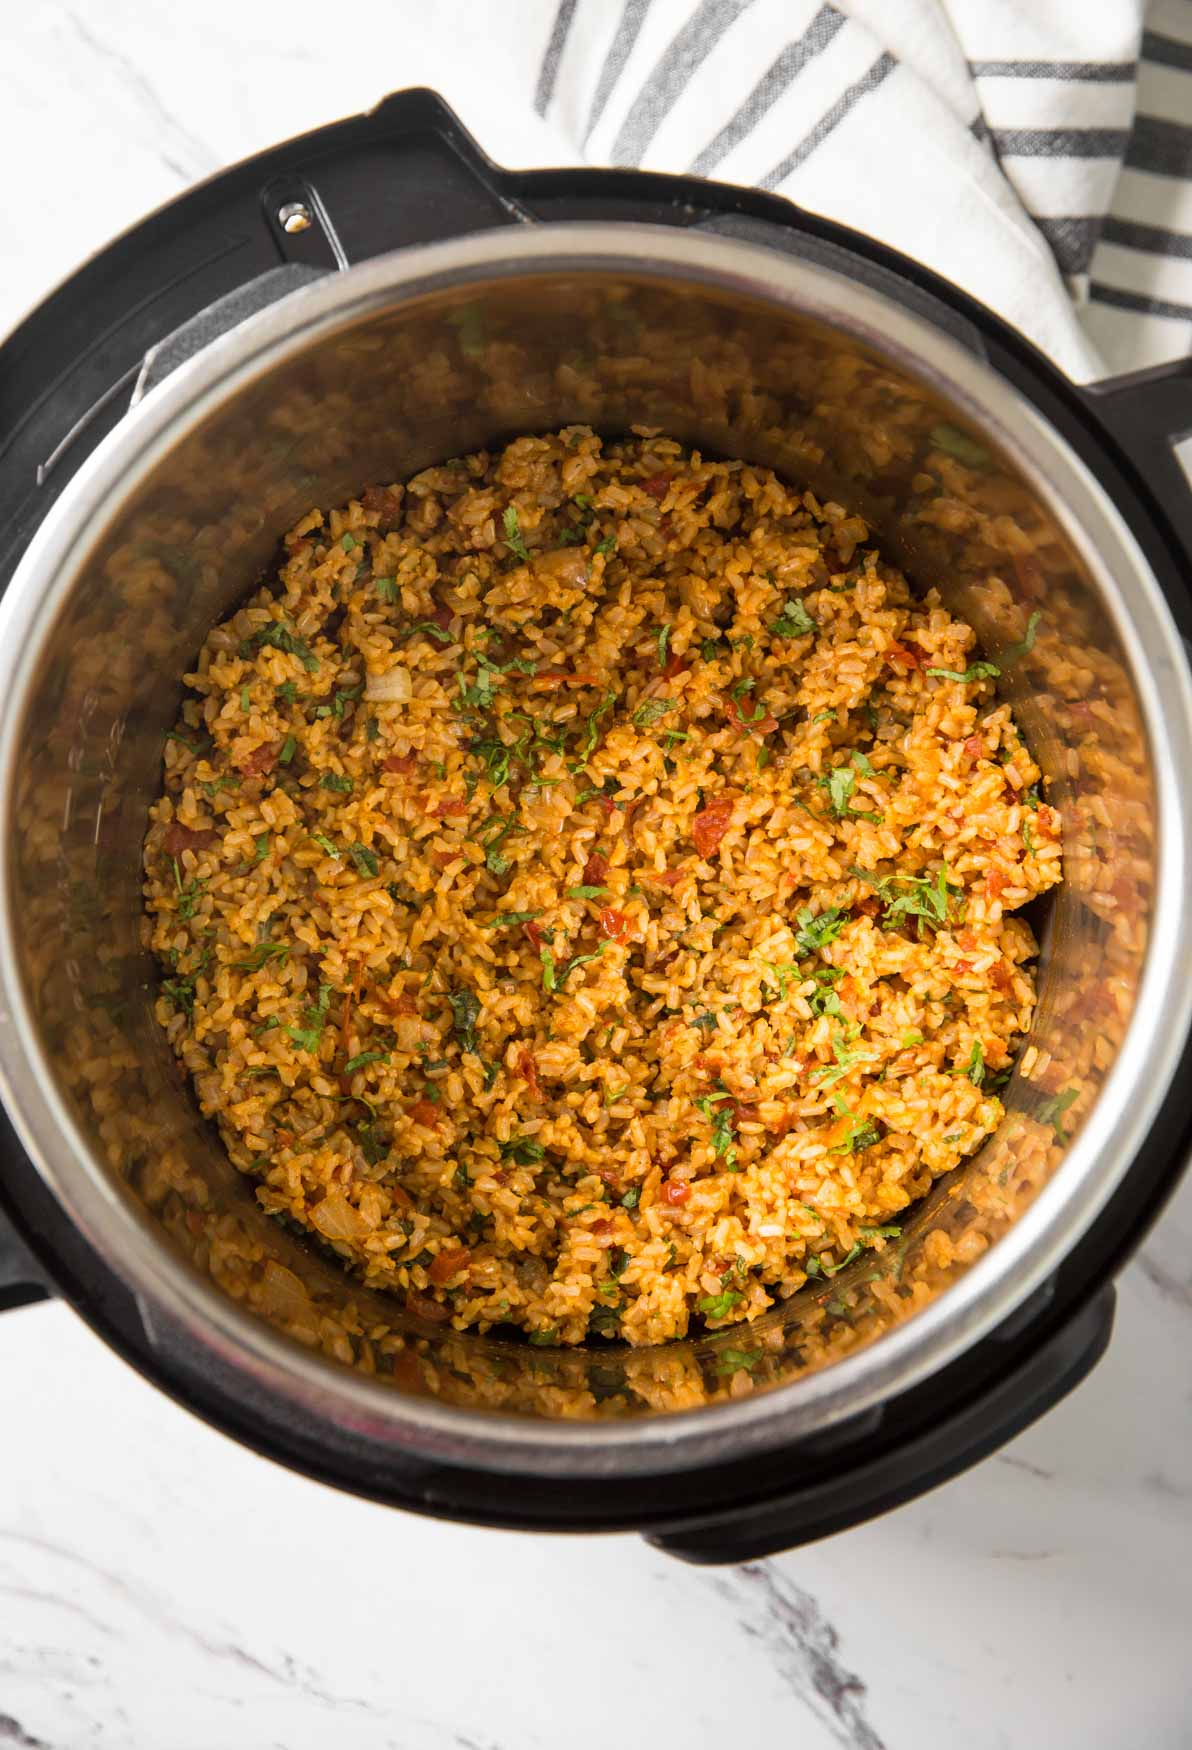 Mexican brown rice prepared in Instant Pot